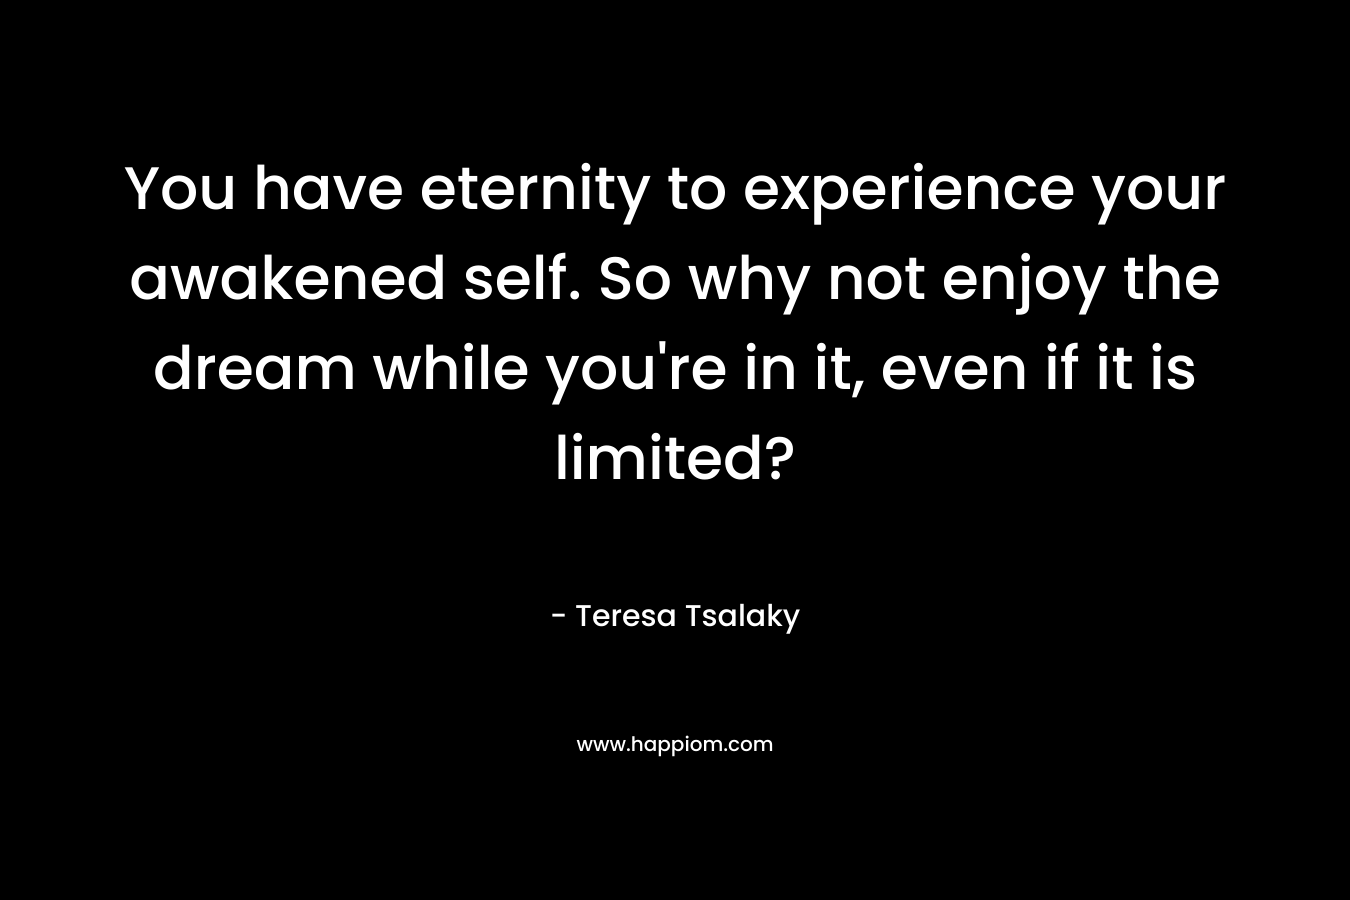 You have eternity to experience your awakened self. So why not enjoy the dream while you’re in it, even if it is limited? – Teresa Tsalaky